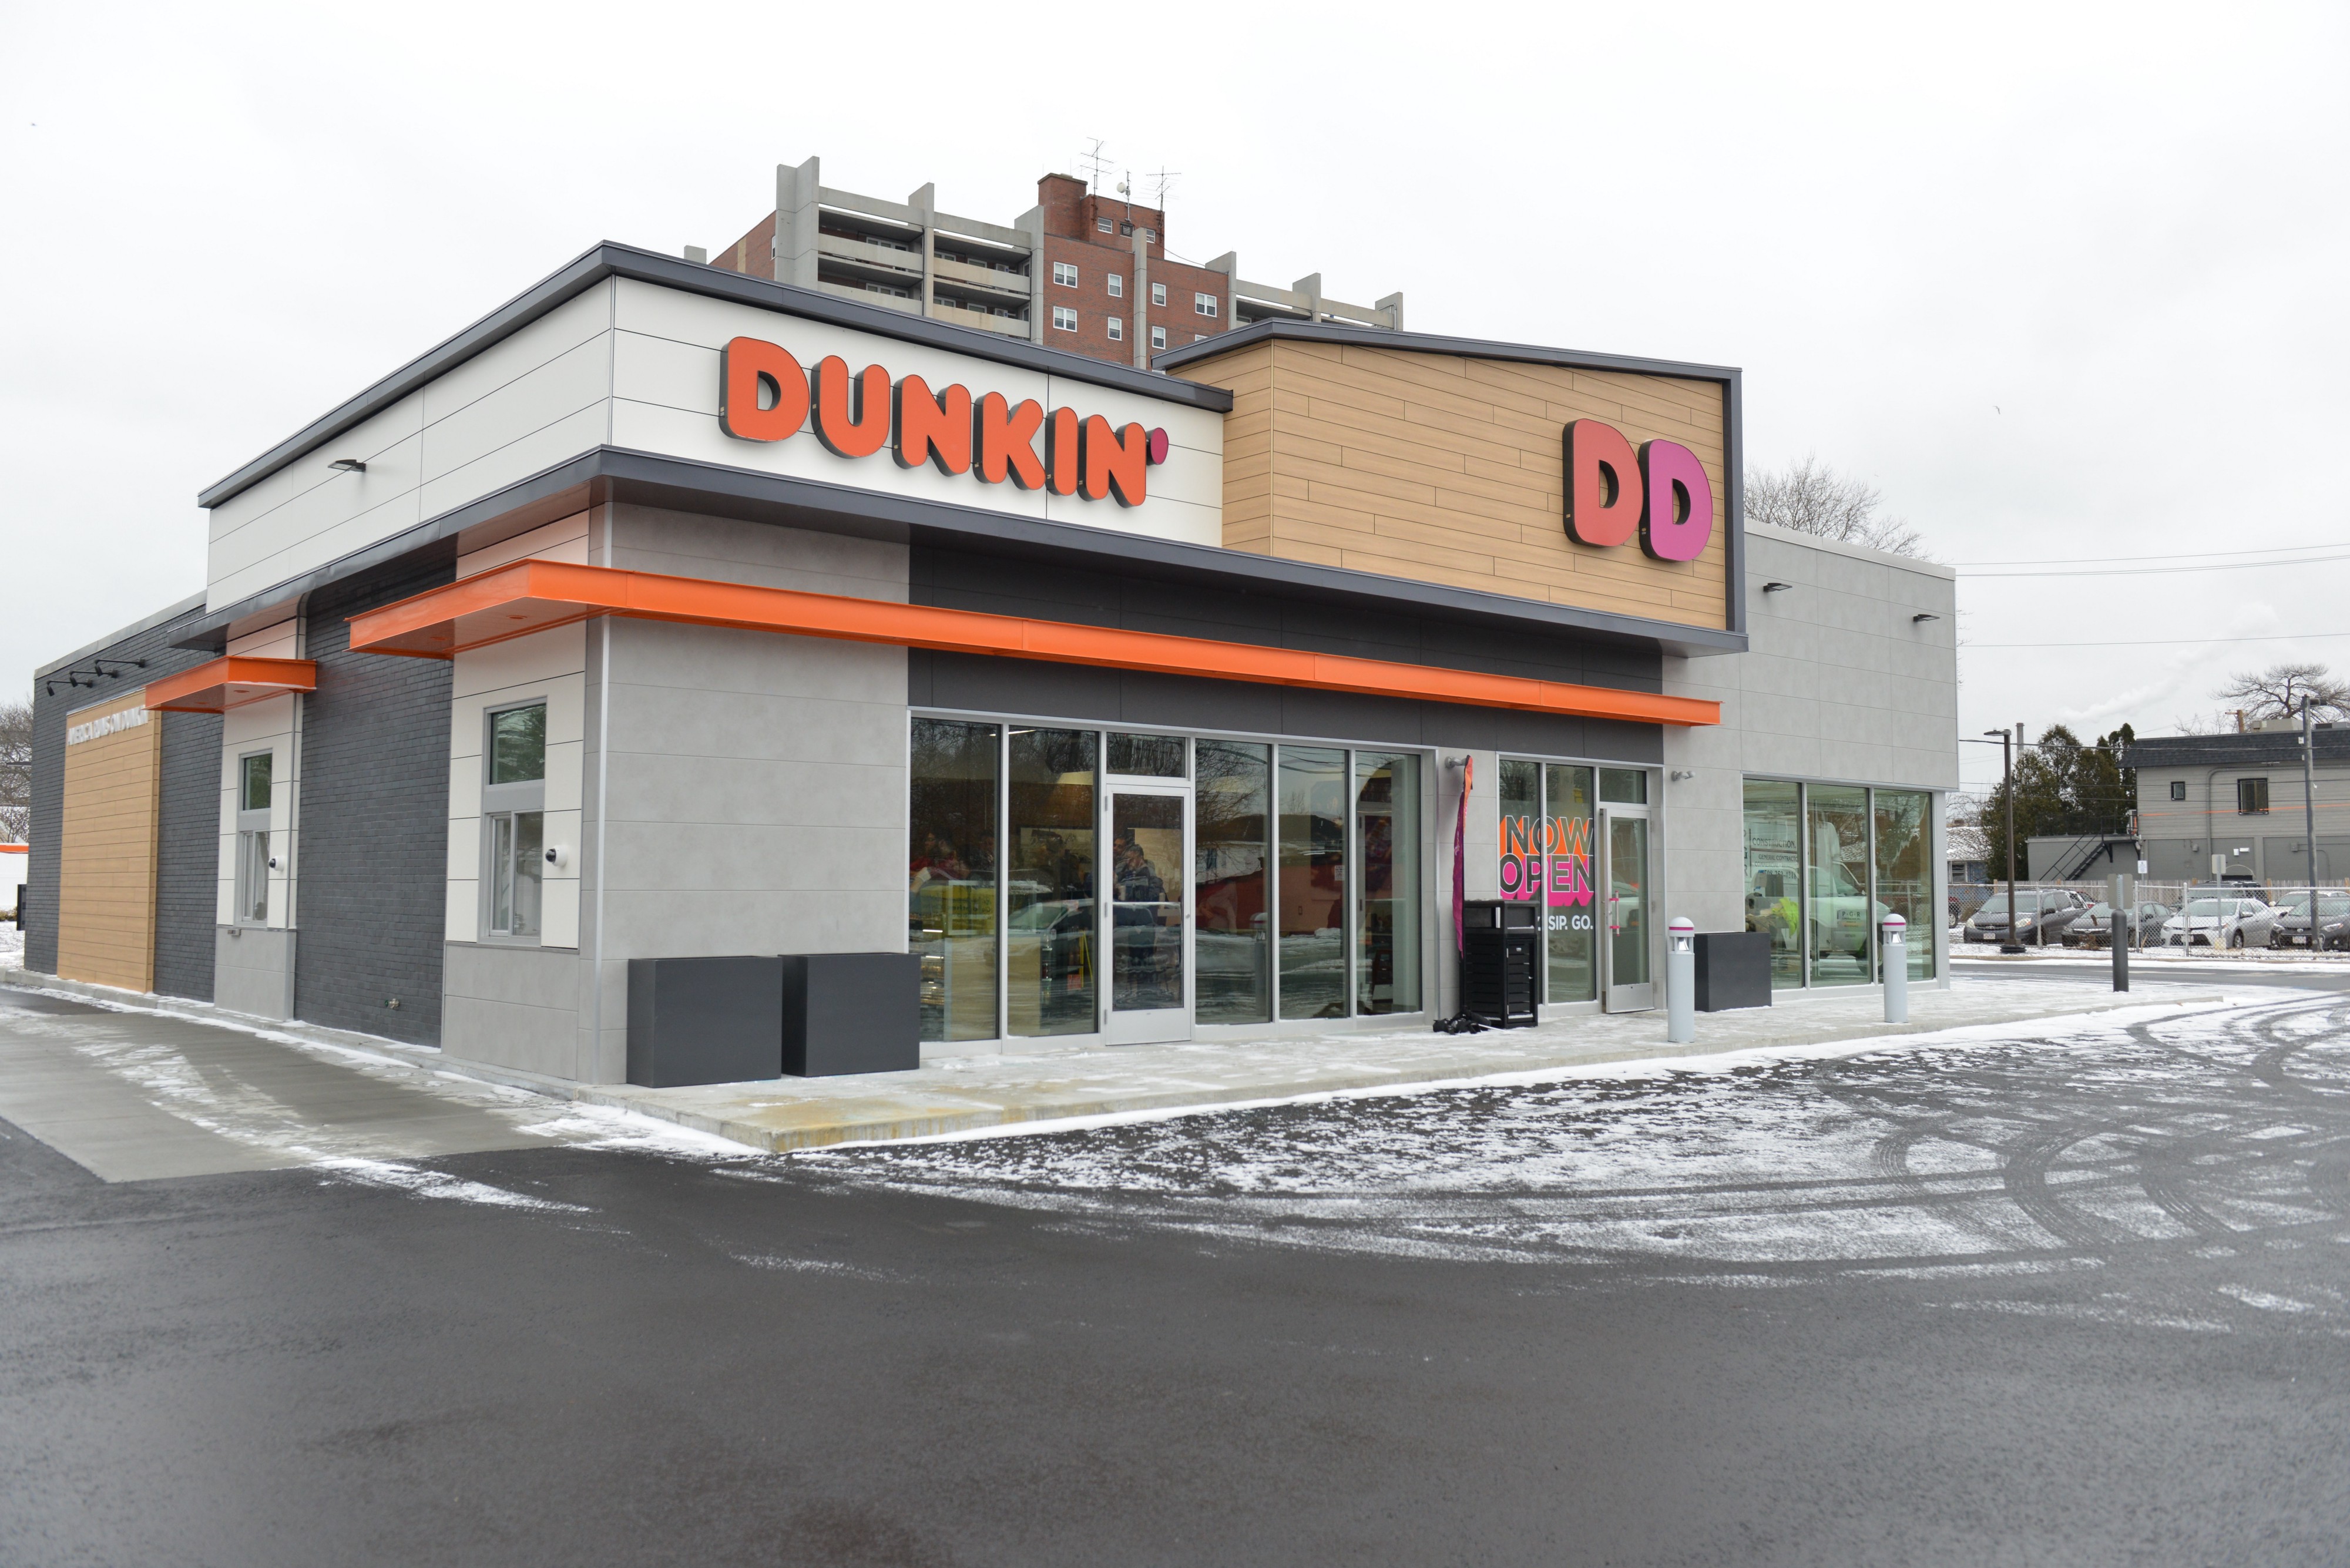 Photo from outside a Dunkin Donuts store